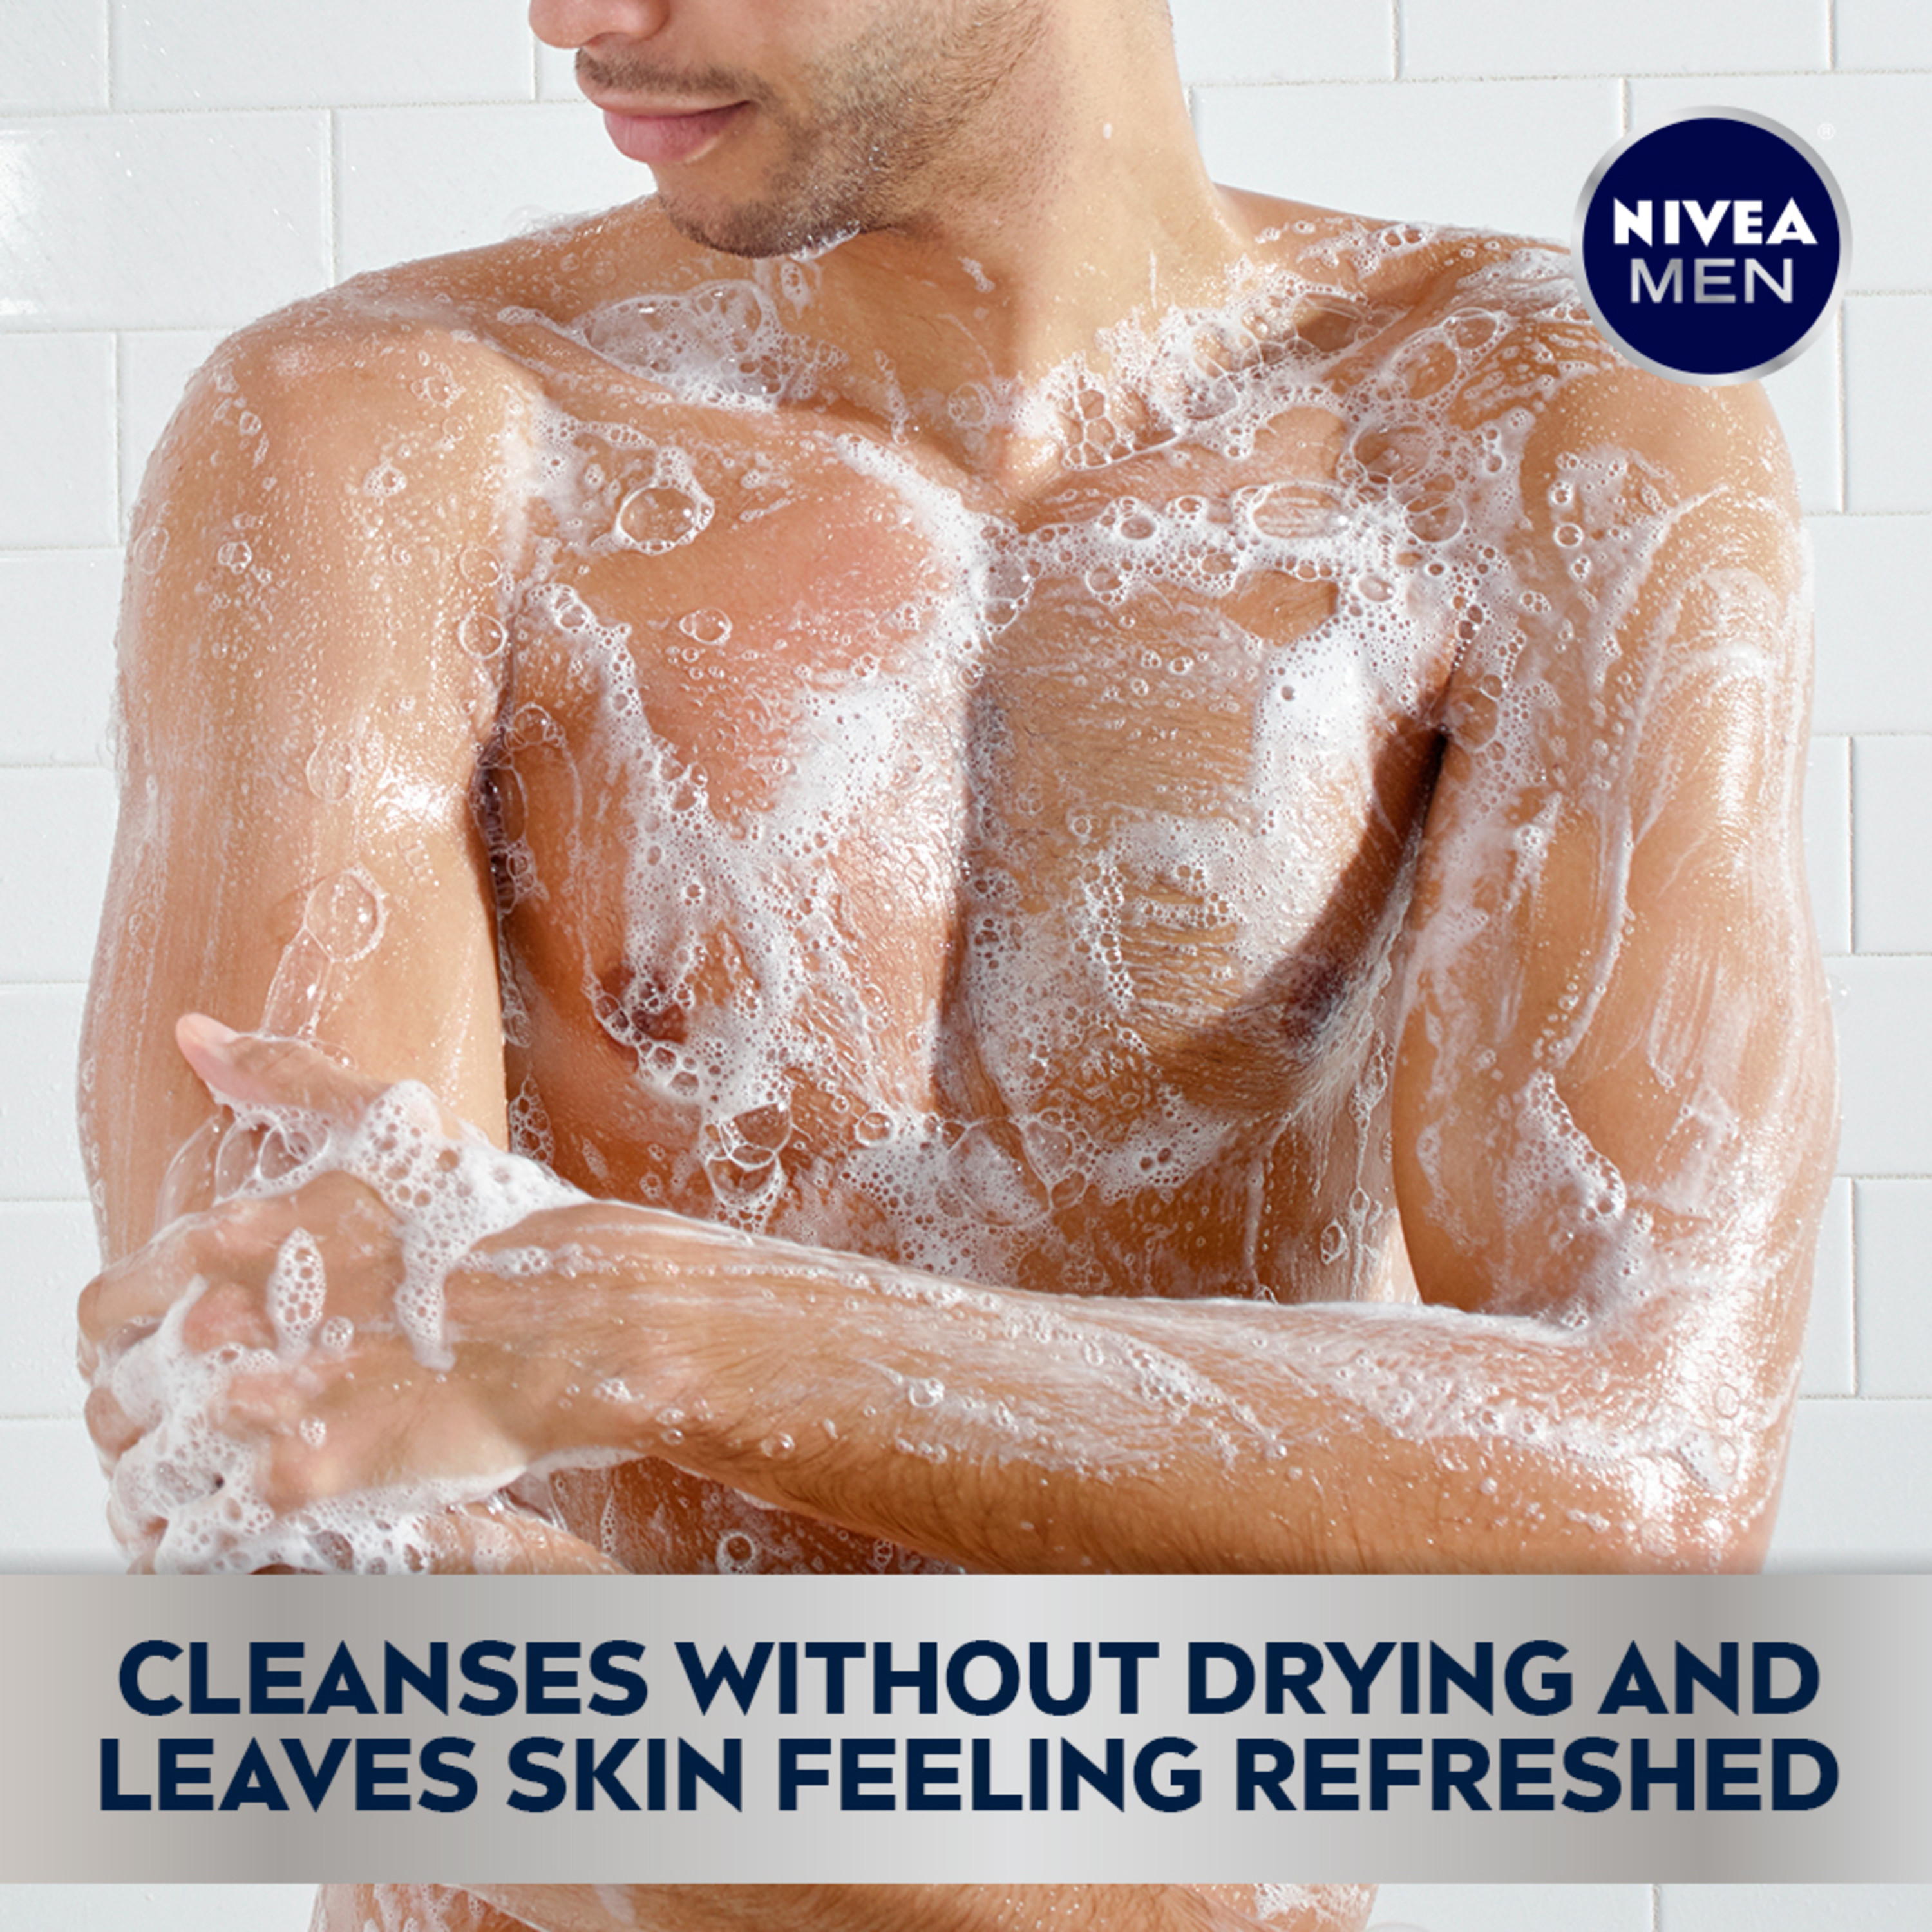 NIVEA MEN Cool Body Wash with Icy Menthol, Scented Body Wash for Men, 16.9 fl oz Bottle - image 5 of 8